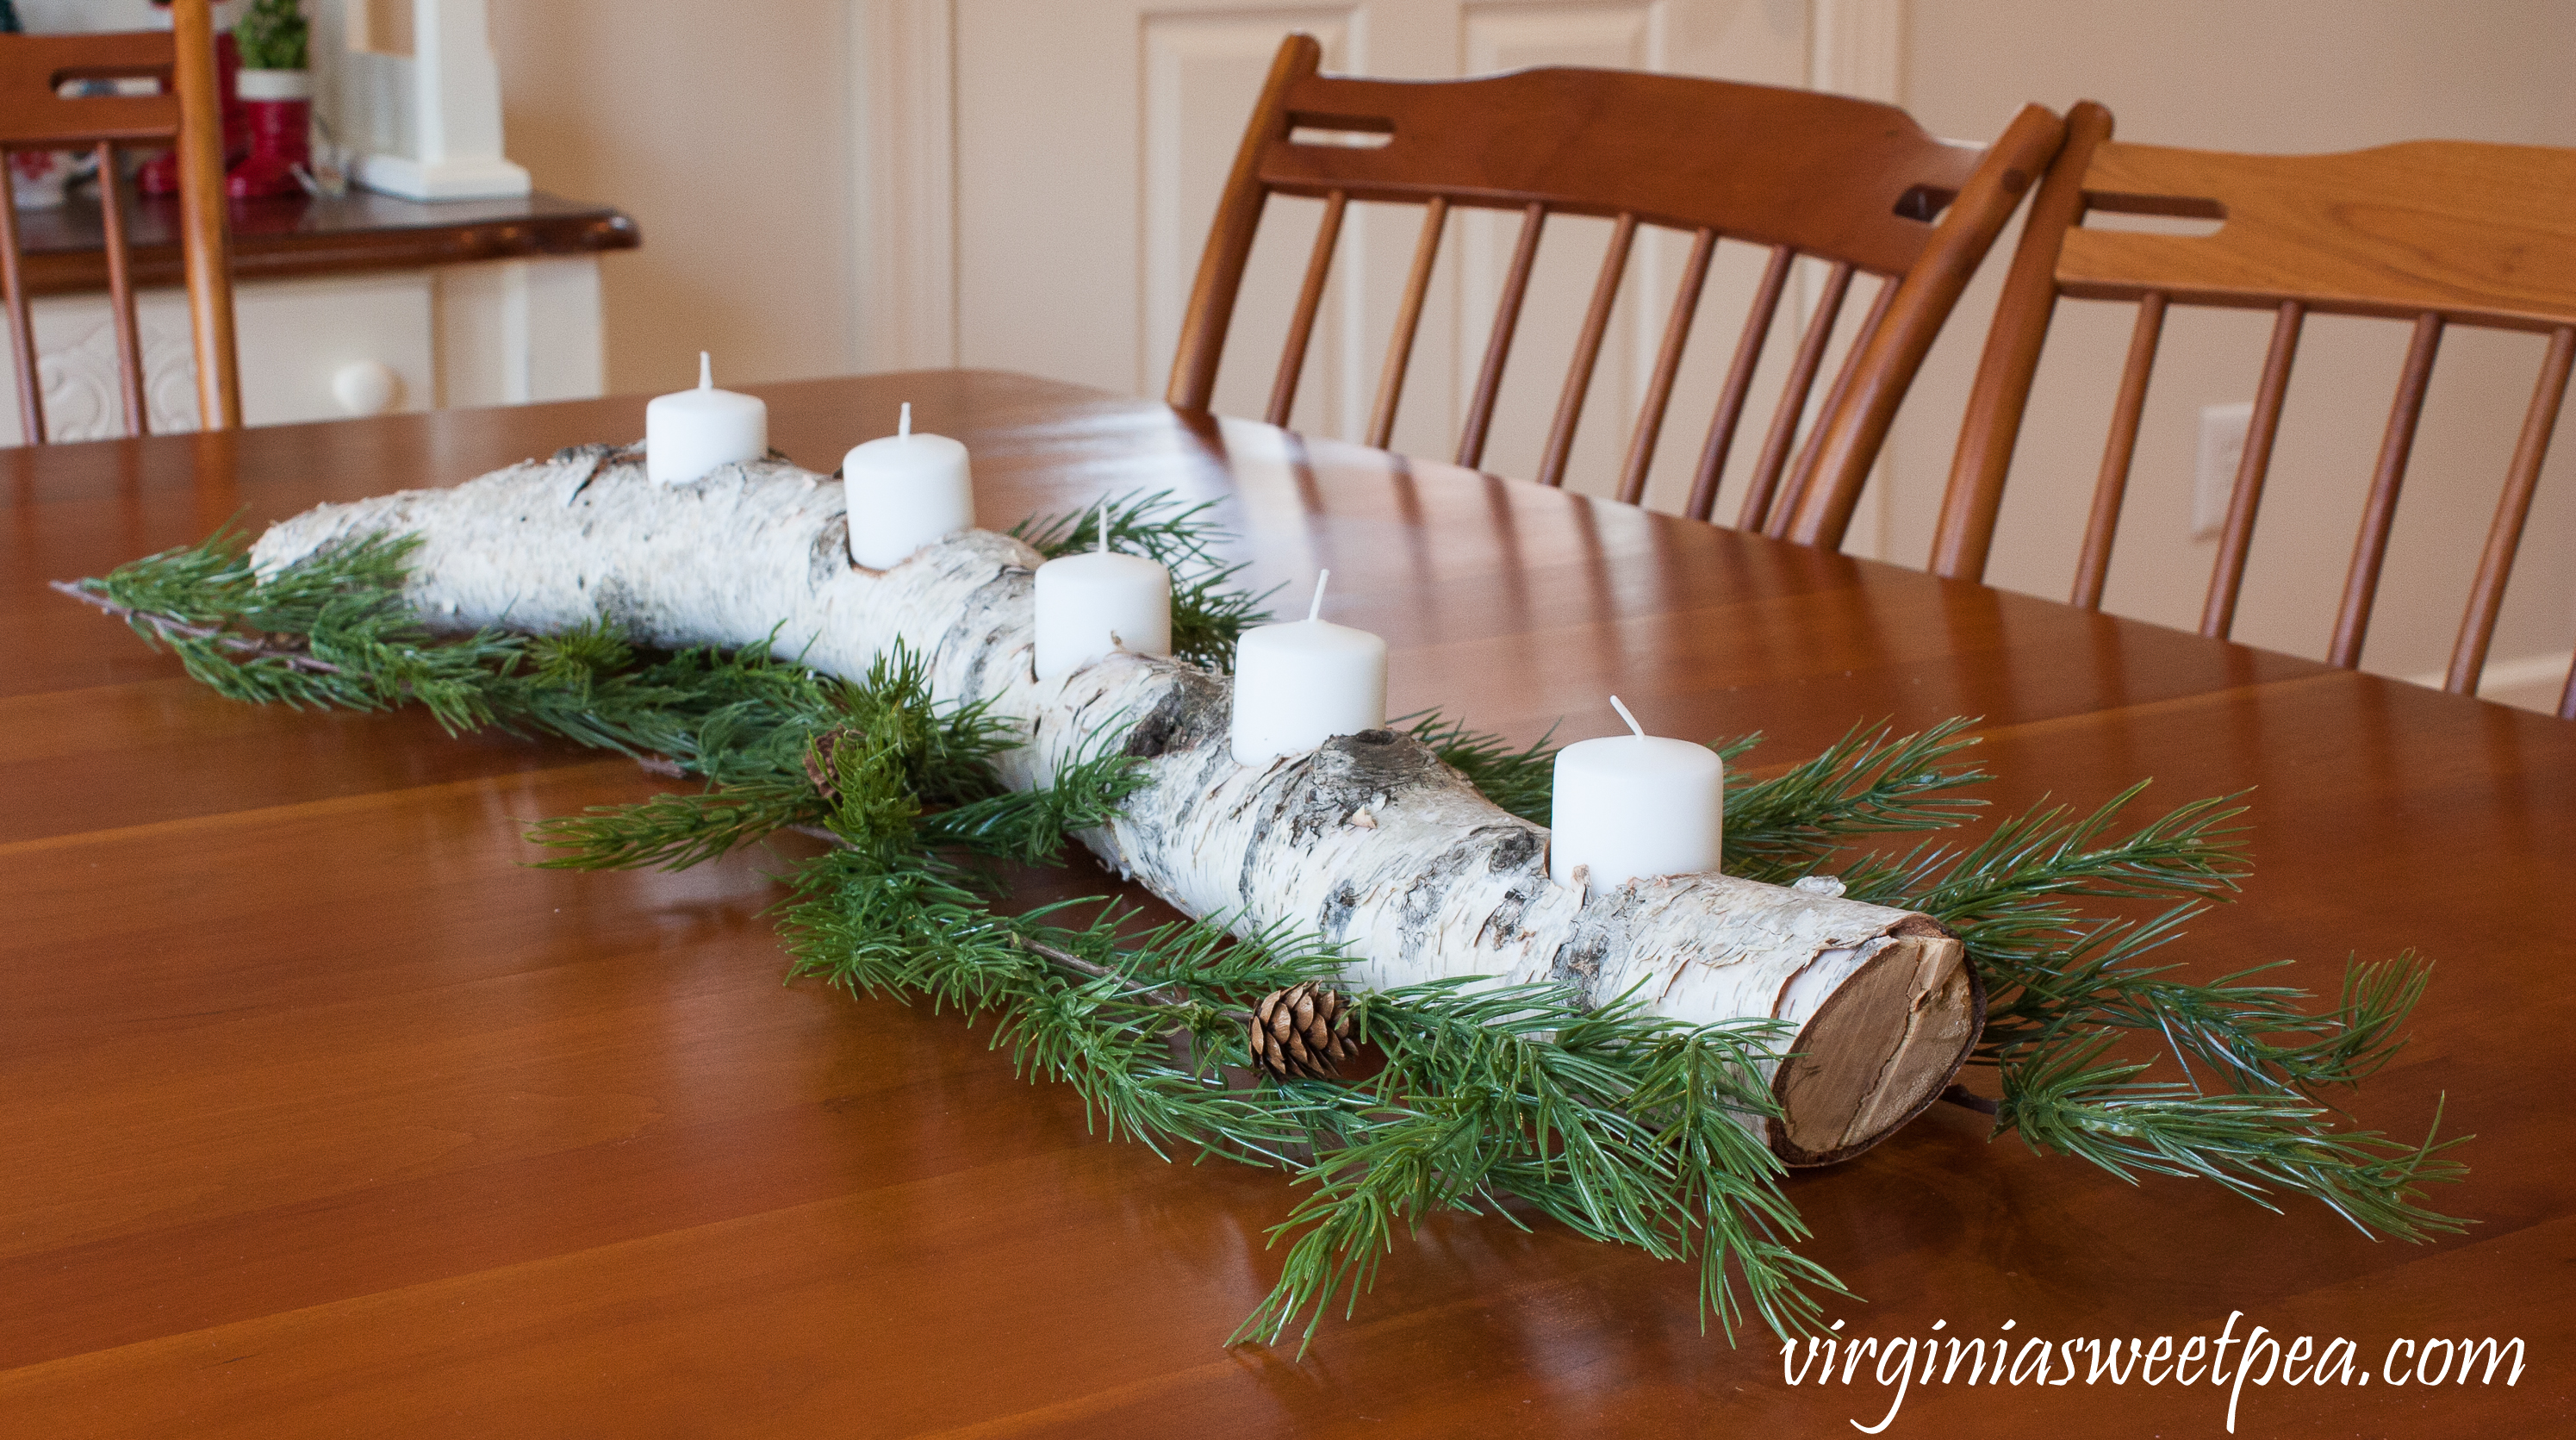 DIY Yuel Log - Learn how to make a yule log to use for decor in your home for winter. #diy #yulelog #diyyulelog